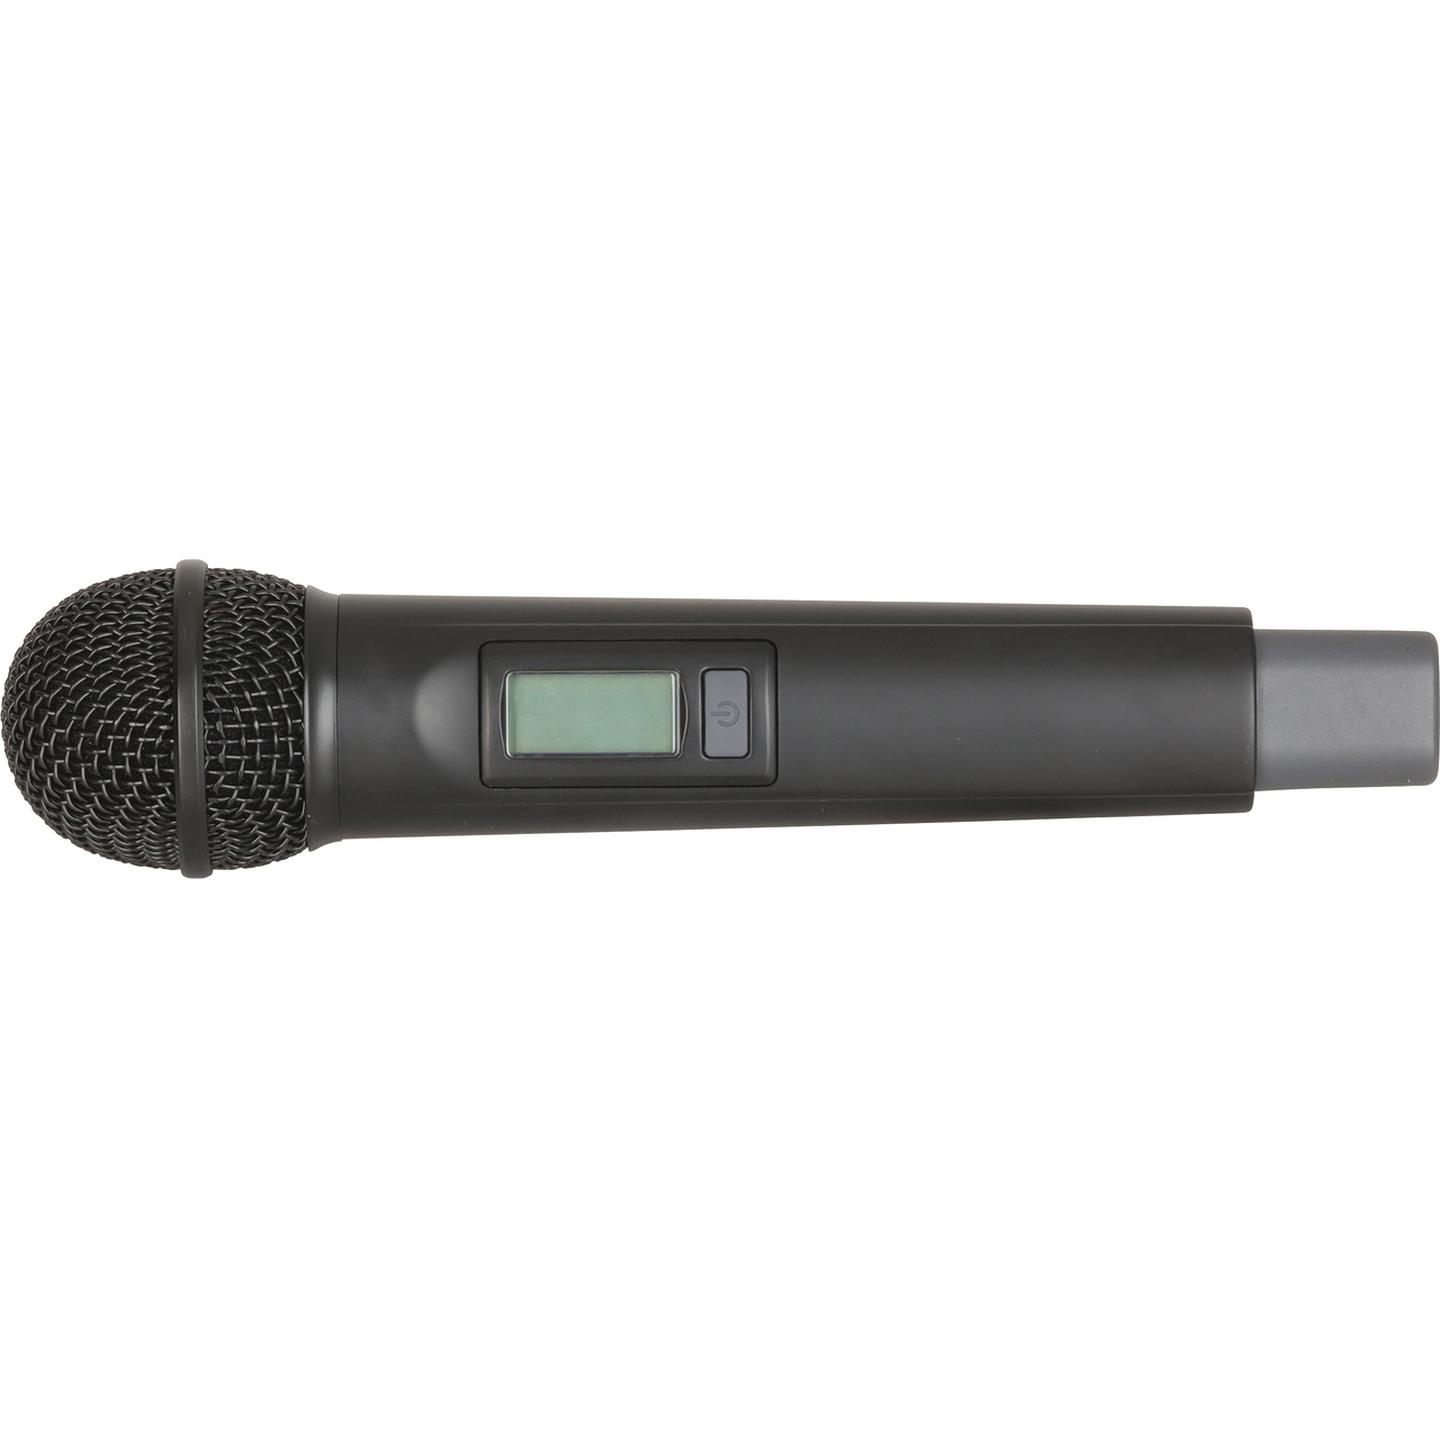 2.4GHz Digital Wireless LCD Microphone to suit AM4160